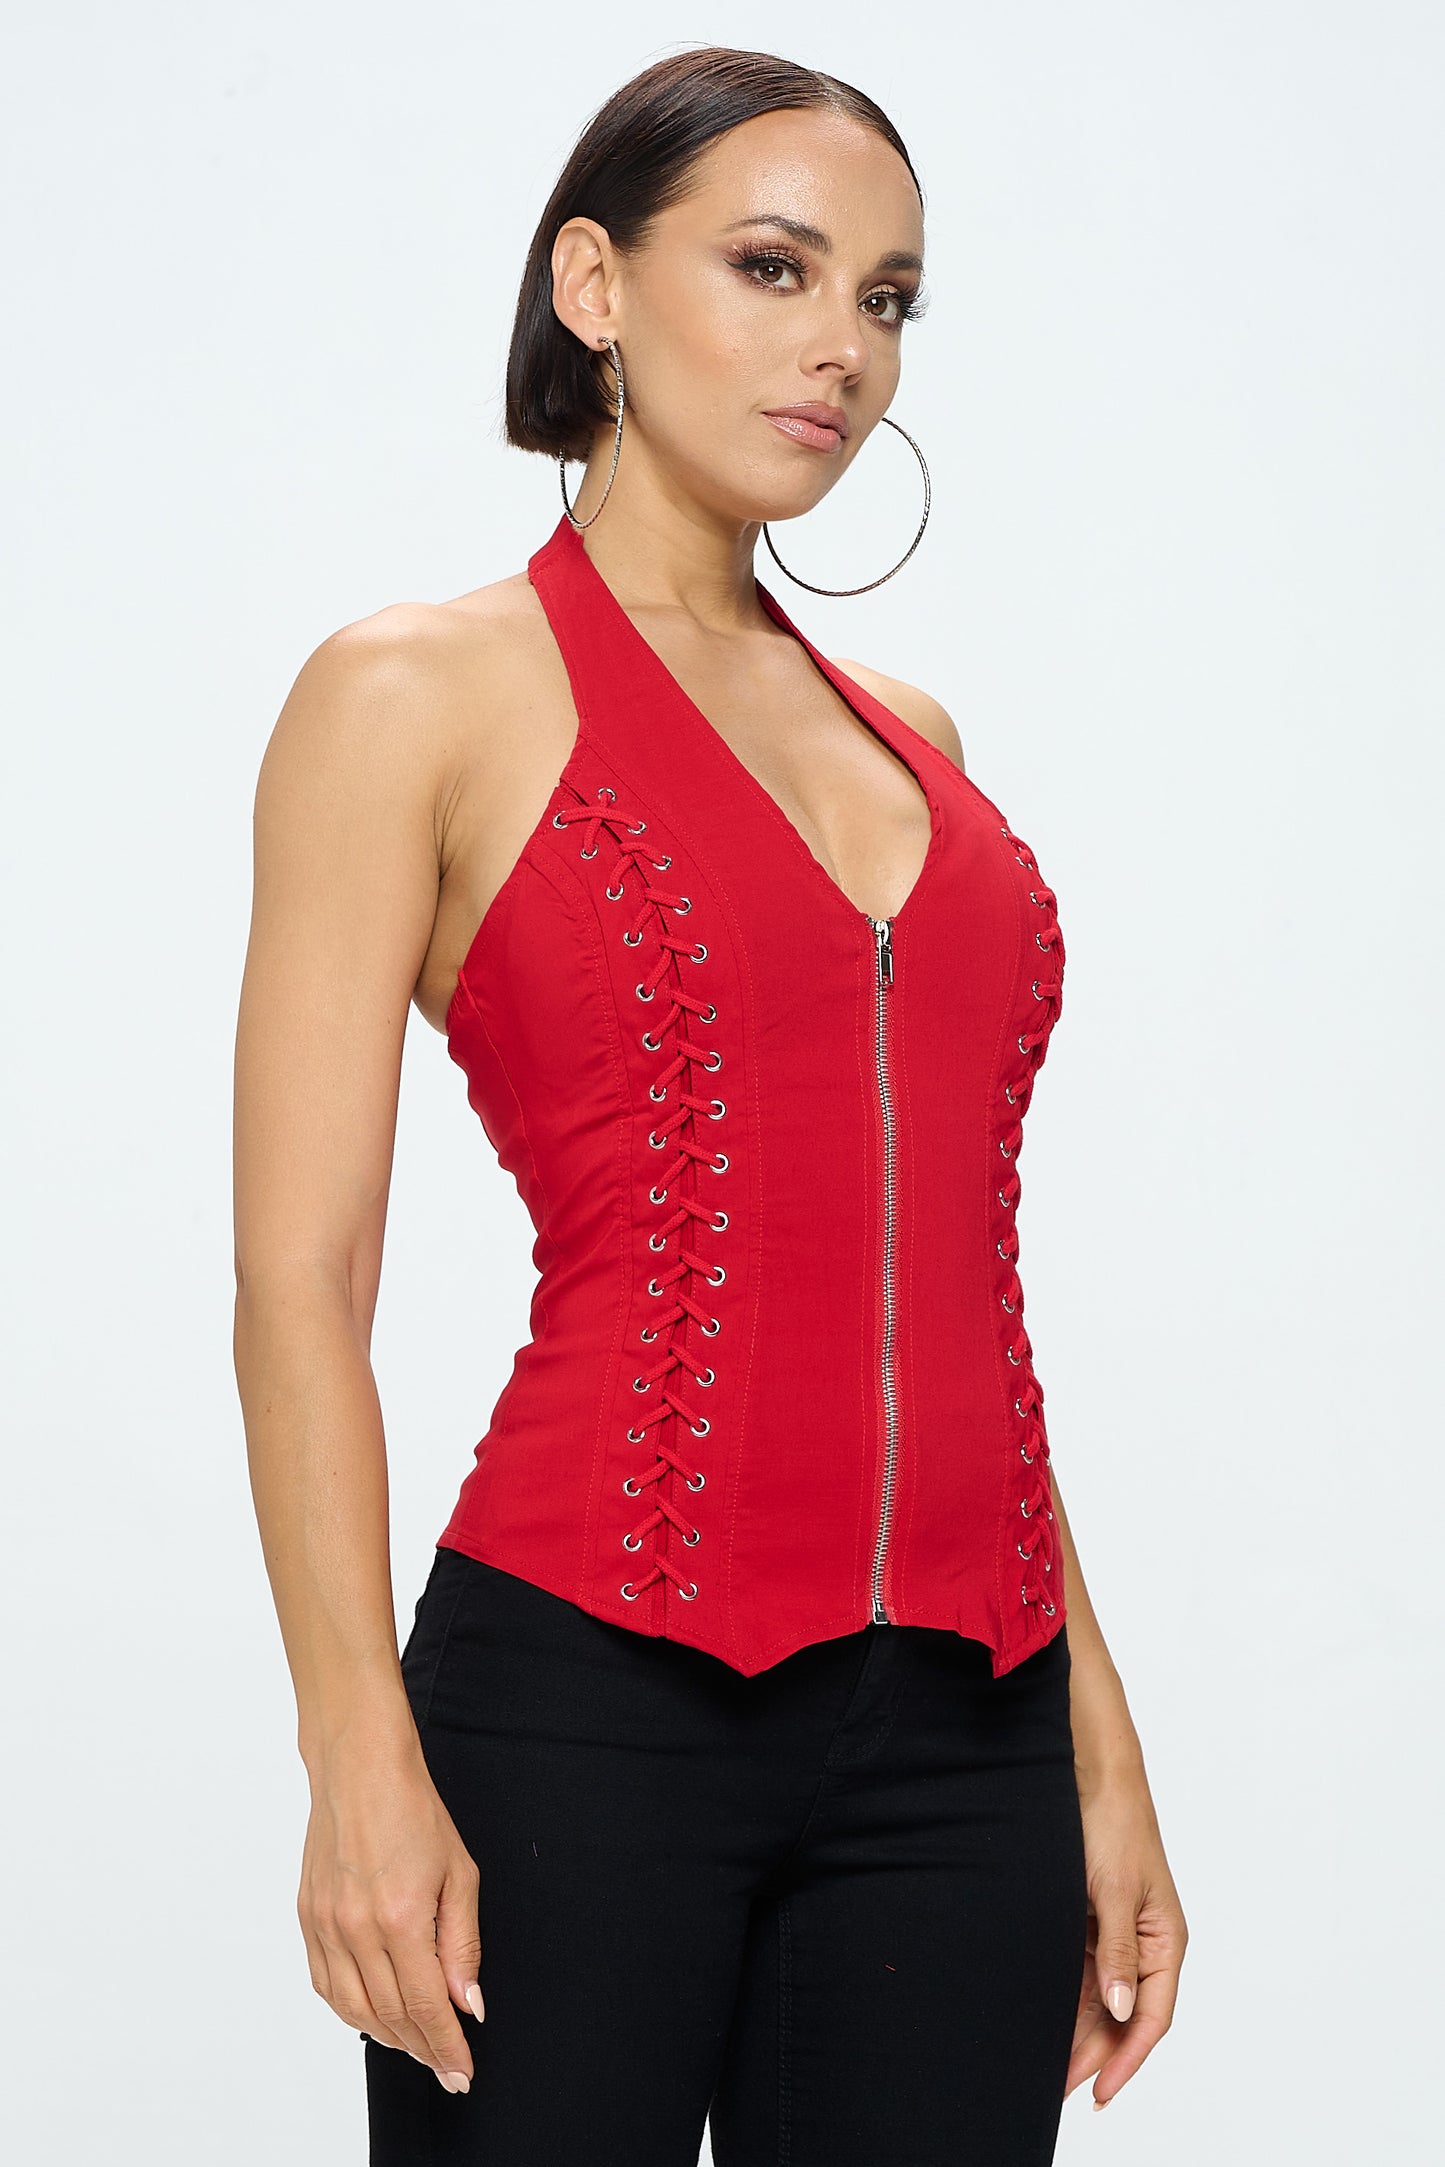 LACE UP DETAIL ZIP UP FRONT CLOSURE HALTER TOP